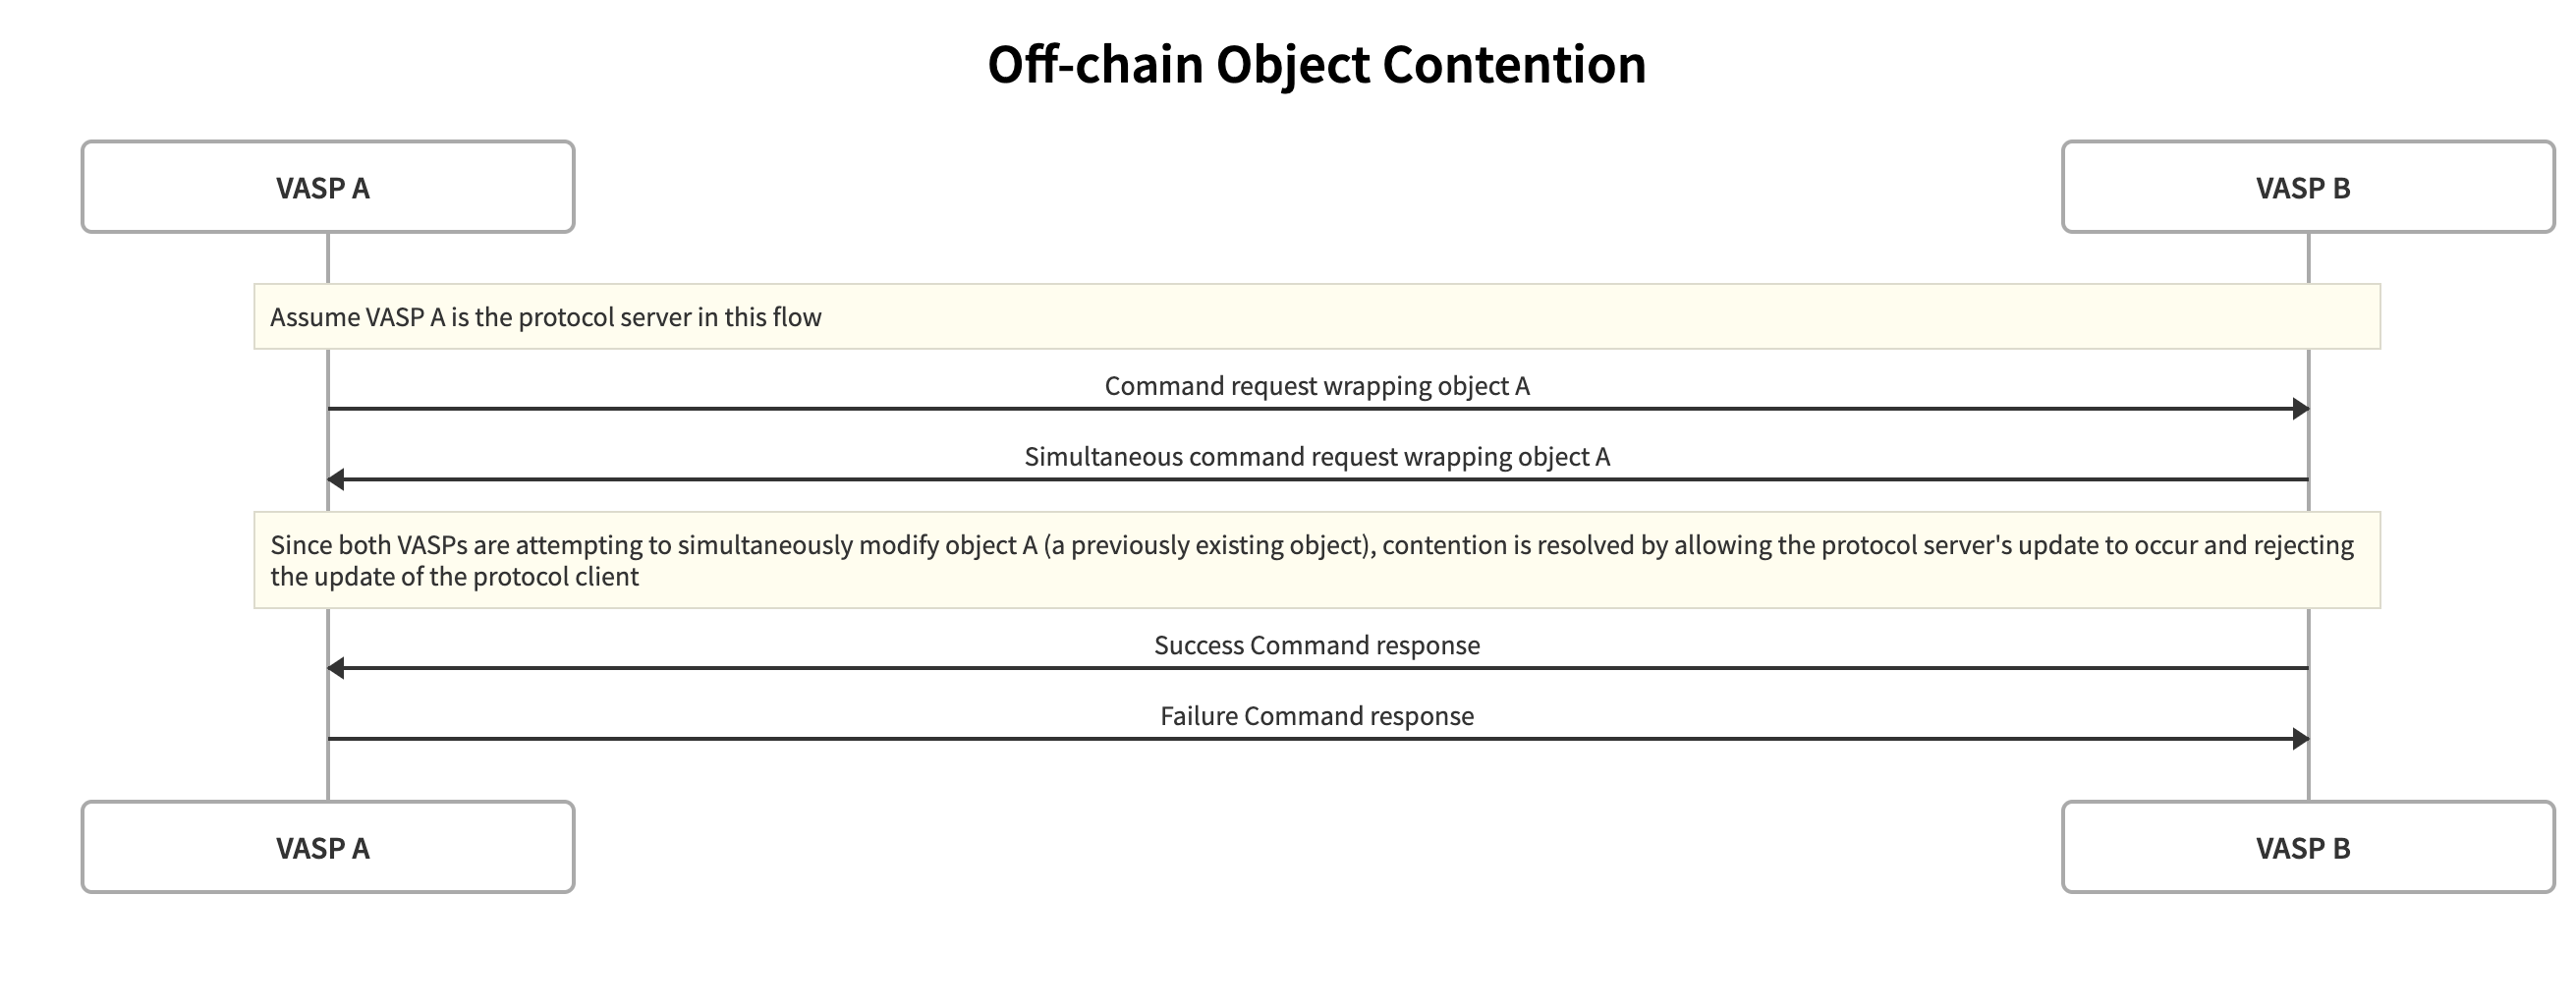 Object Contention